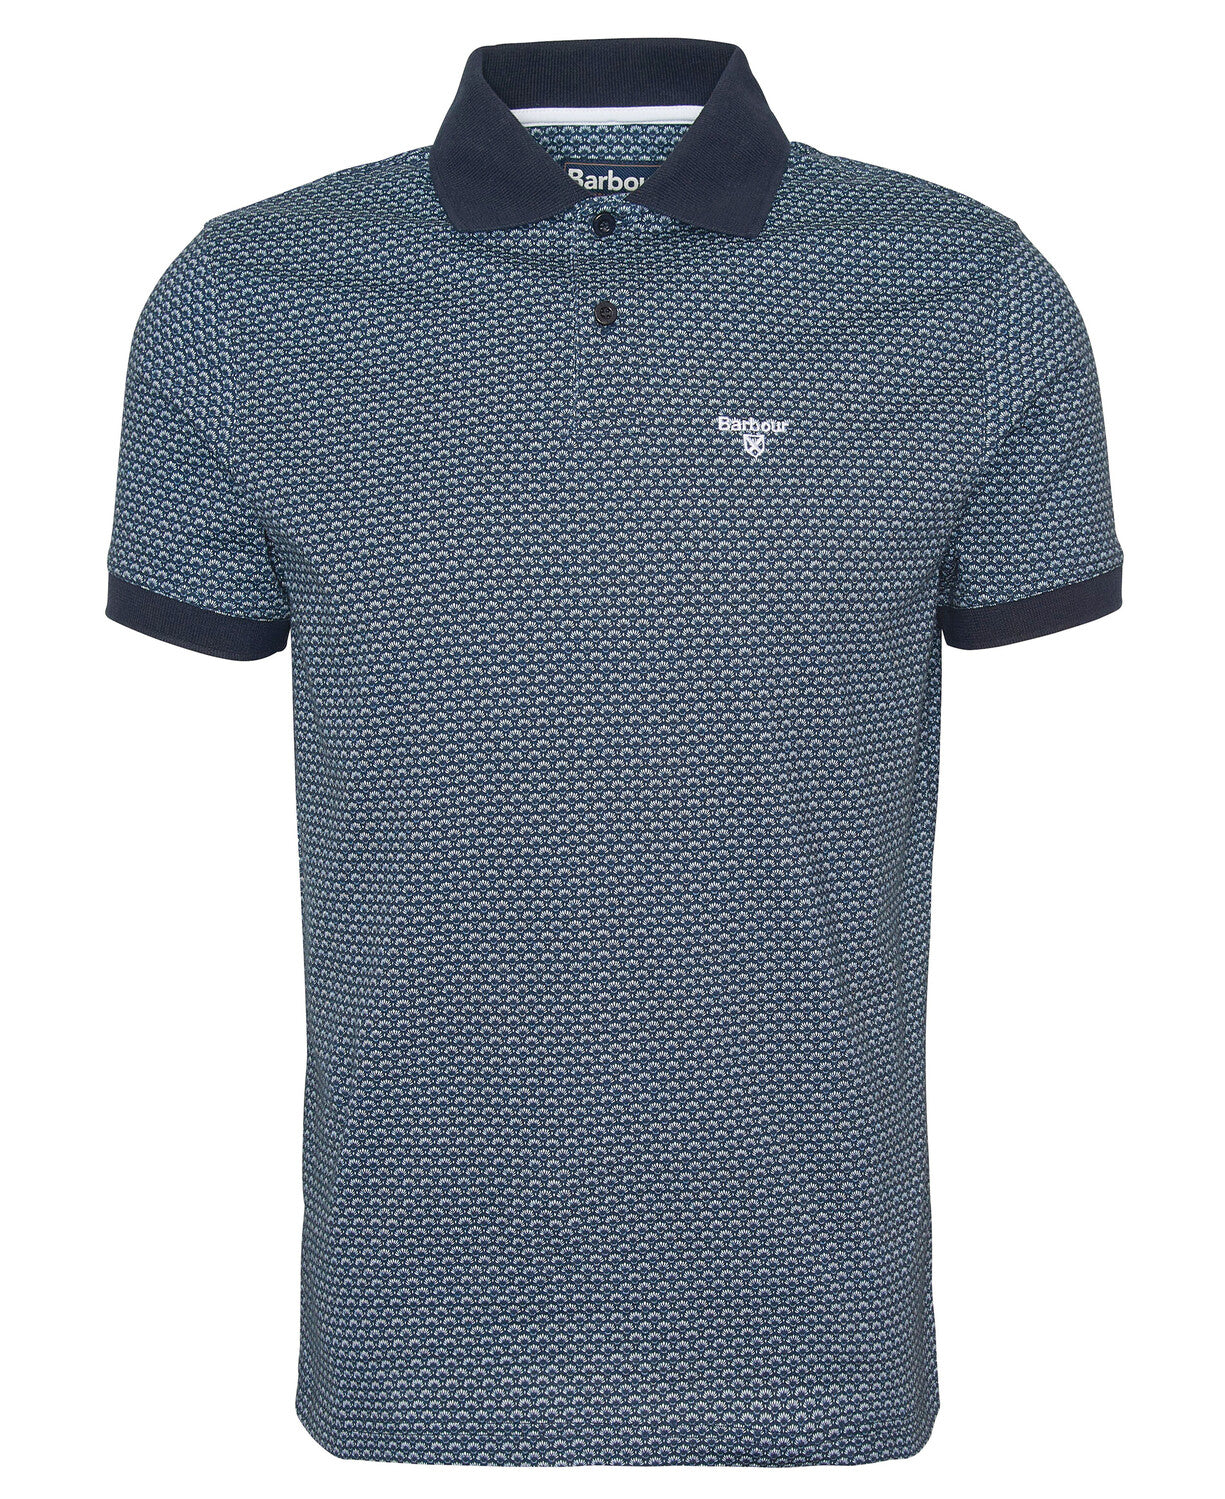 Barbour Shell Navy Polo Top